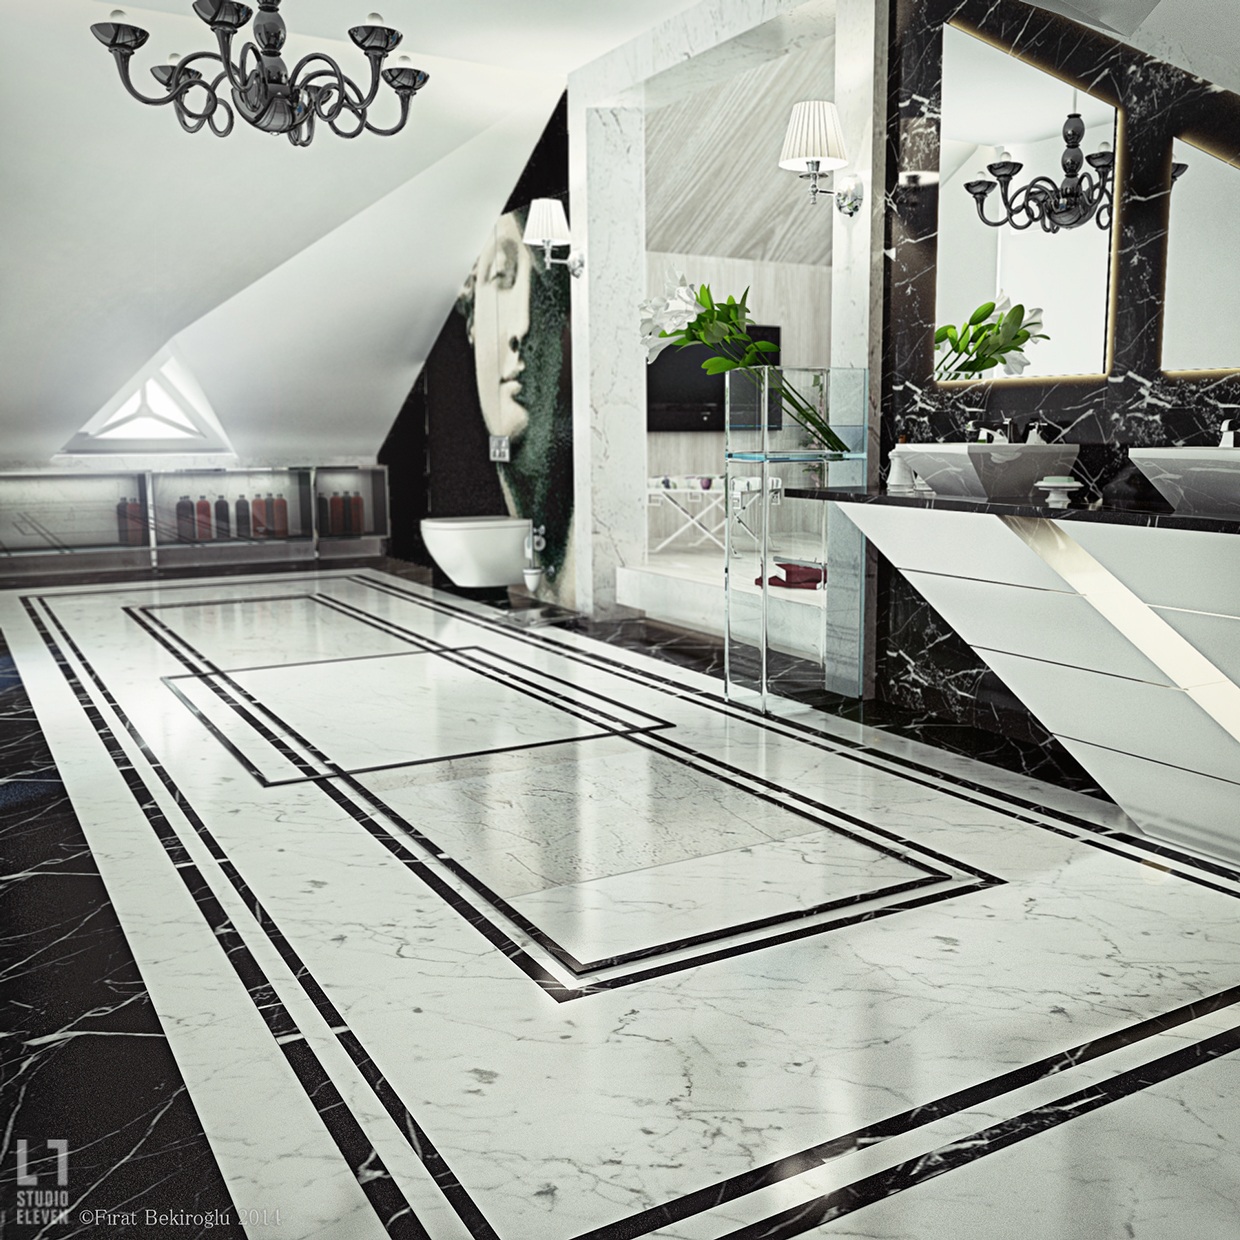 Black and white bathroom "width =" 1240 "height =" 1240 "srcset =" https://mileray.com/wp-content/uploads/2020/05/Luxury-Bathroom-Decor-With-Beautiful-and-Trendy-Design-Which-Looks.jpg 1240w, https://mileray.com/wp-content/uploads/2016/09/black-and-white-bathroom-Fırat-Bekiroğlu-150x150.jpg 150w, https://mileray.com/wp-content/uploads / 2016/09 / Black-White-Bathroom-Fırat-Bekiroğlu-300x300.jpg 300w, https://mileray.com/wp-content/uploads/2016/09/black-and-white-bathroom-Fırat-Bekiroğlu - 768x768.jpg 768w, https://mileray.com/wp-content/uploads/2016/09/black-and-white-bathroom-Fırat-Bekiroğlu-1024x1024.jpg 1024w, https://mileray.com/wp - content / uploads / 2016/09 / Black-White-Bathroom-Fırat-Bekiroğlu-696x696.jpg 696w, https://mileray.com/wp-content/uploads/2016/09/black-and-white- Bathroom-Fırat -Bekiroğlu-1068x1068.jpg 1068w, https://mileray.com/wp-content/uploads/2016/09/black-and-white-bathroom-Fırat-Bekiroğlu-420x420.jpg 420w "Sizes =" (maximum width: 1240px) 100vw, 1240px